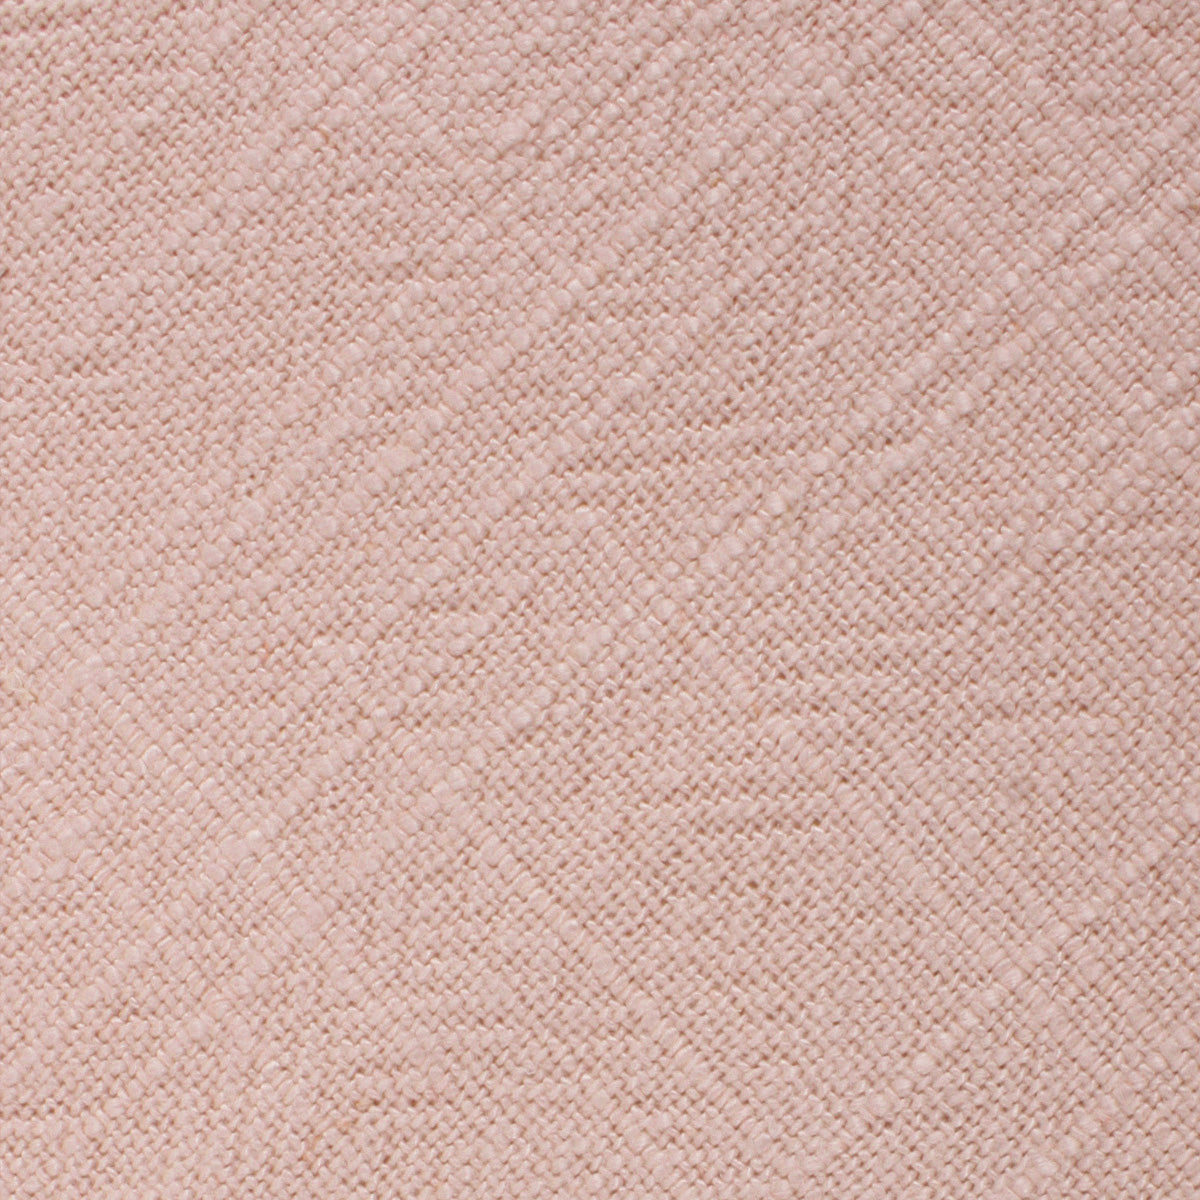 Cameo Beige Pink Chenille Linen Fabric Swatch